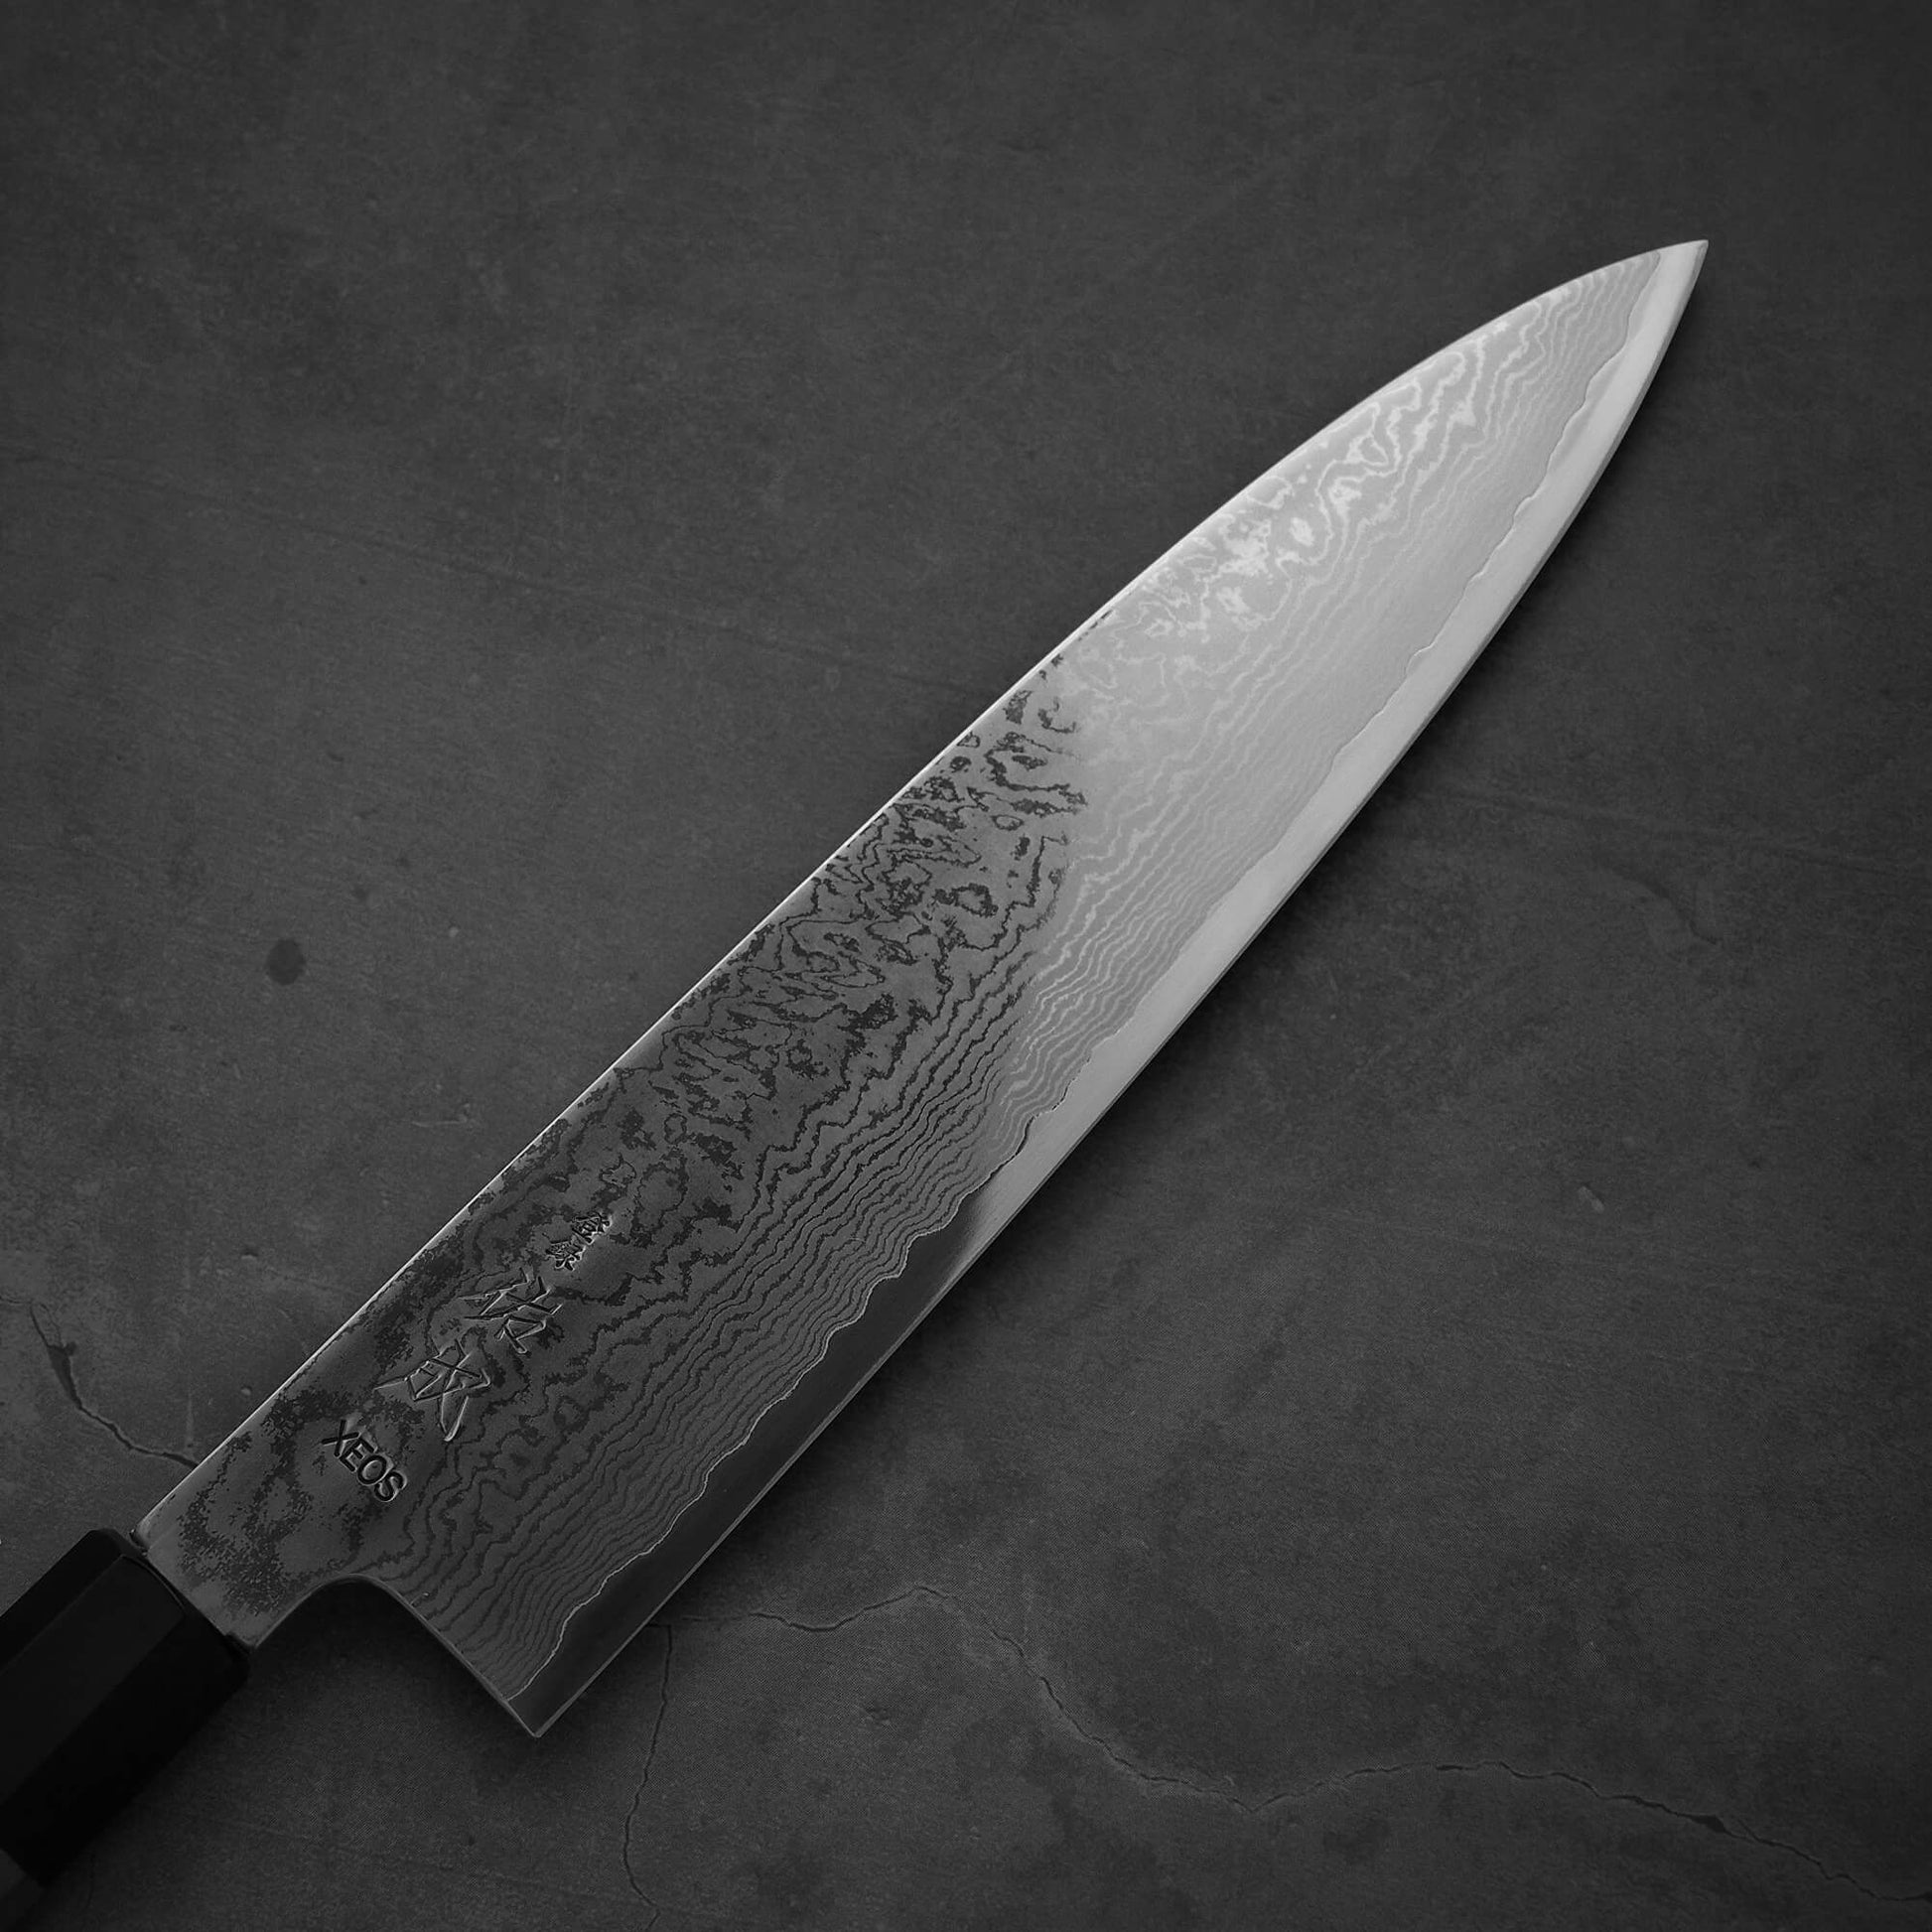 Close up view of the blade of Sukenari damascus XEOS gyuto. Image shows the right side of the blade